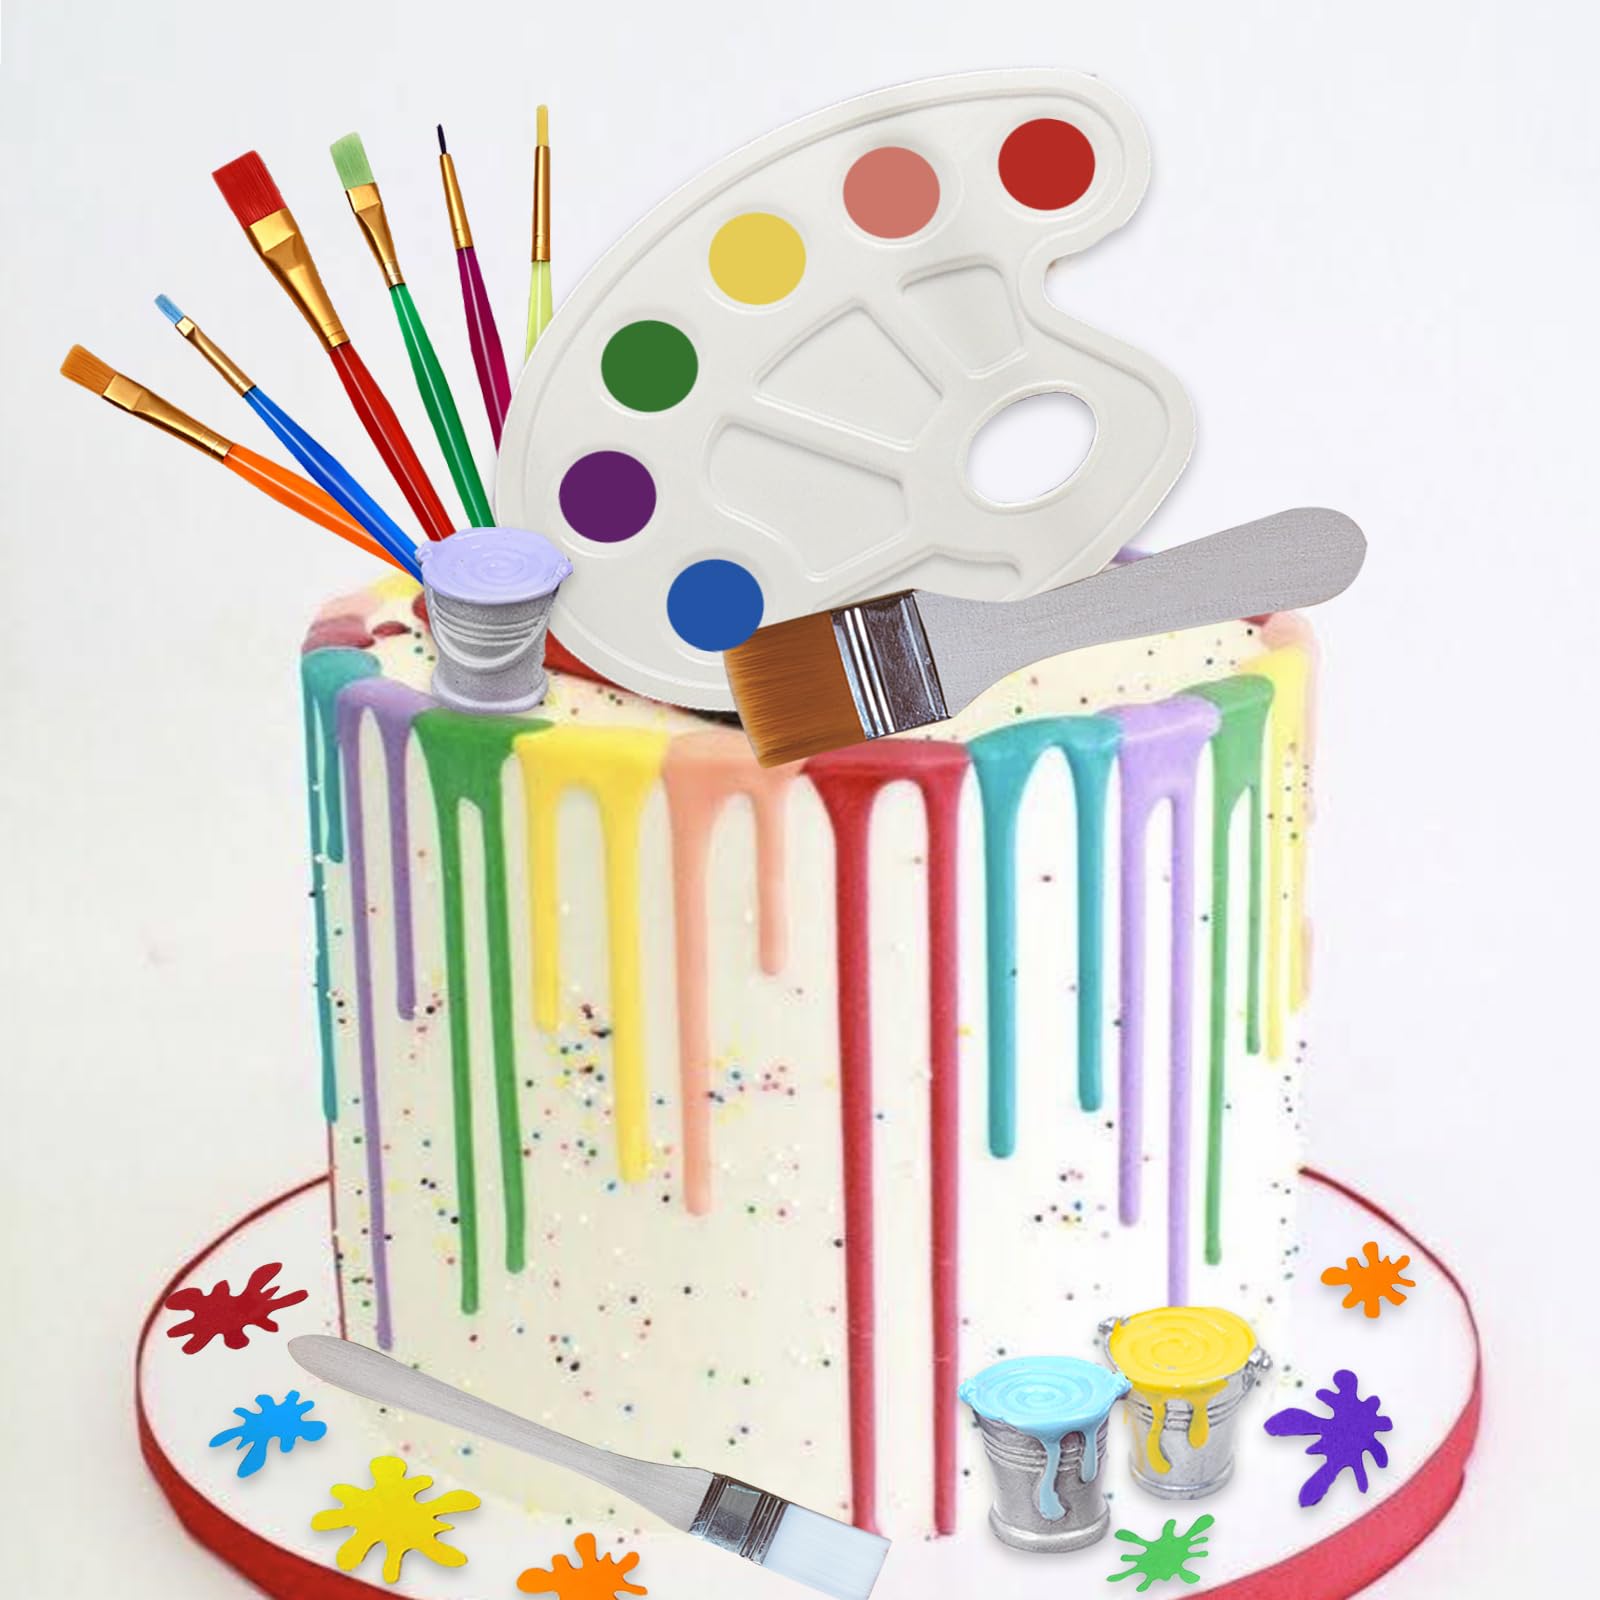 26 Pcs Art Cake Topper Paint Cake Decorations Painting Cake Toppers include Paint Pen Brush Painting Bucket Palette for Kids Birthday Baby Shower Art Themed Party Cake Decoration Supplies